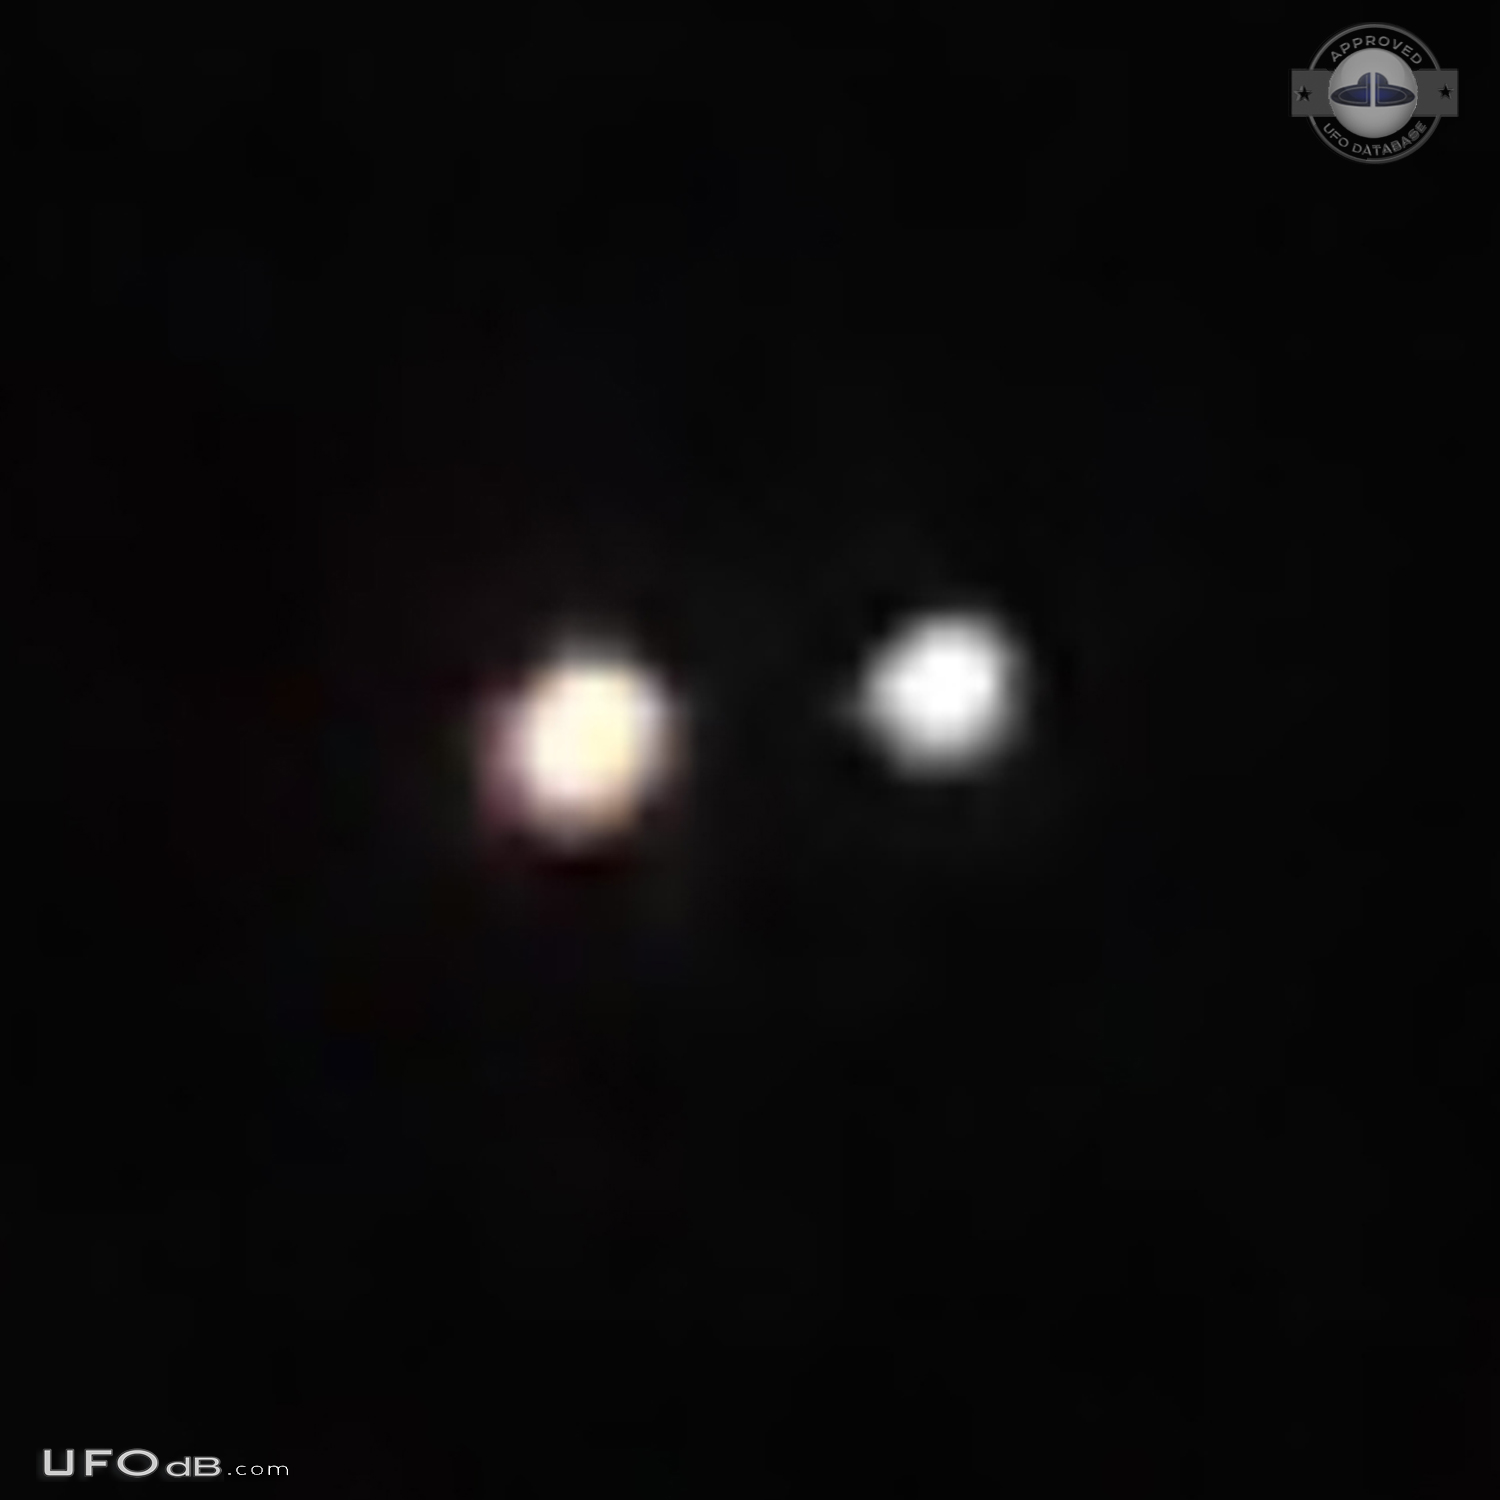 3 bright lights UFOs not too far up in the sky sitting still - Canada UFO Picture #674-2